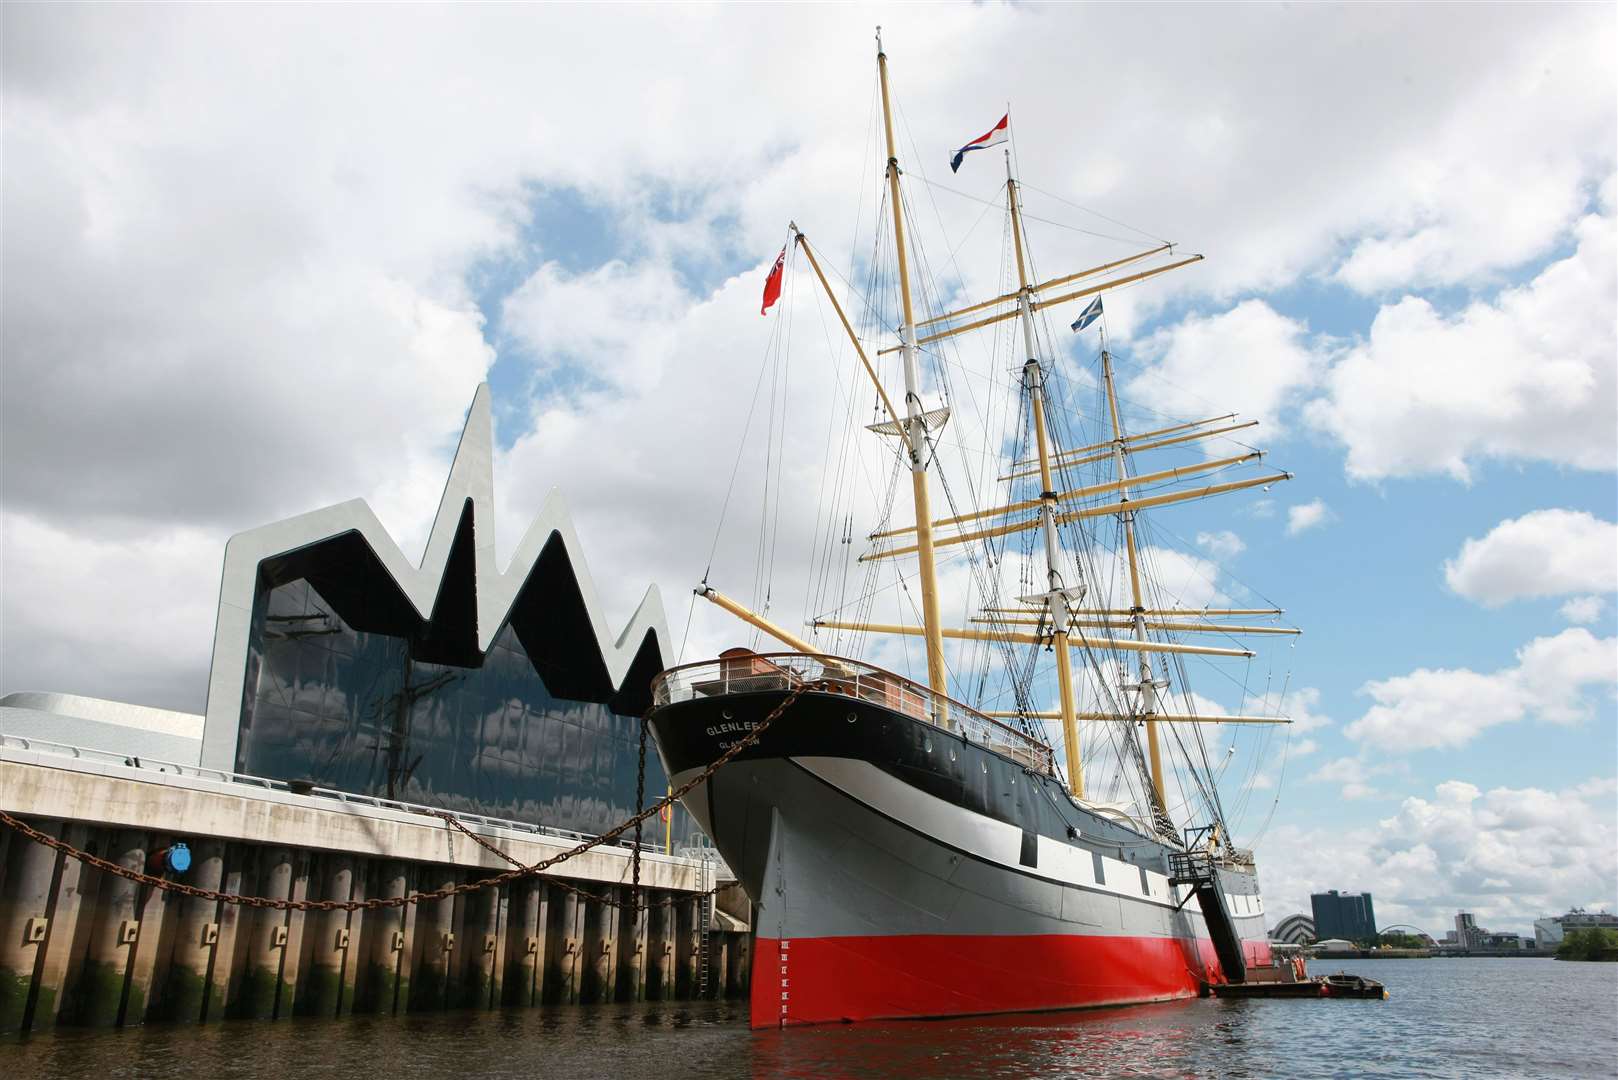 Don't miss The Apprentice's Tale on The Tall Ship Glenlee